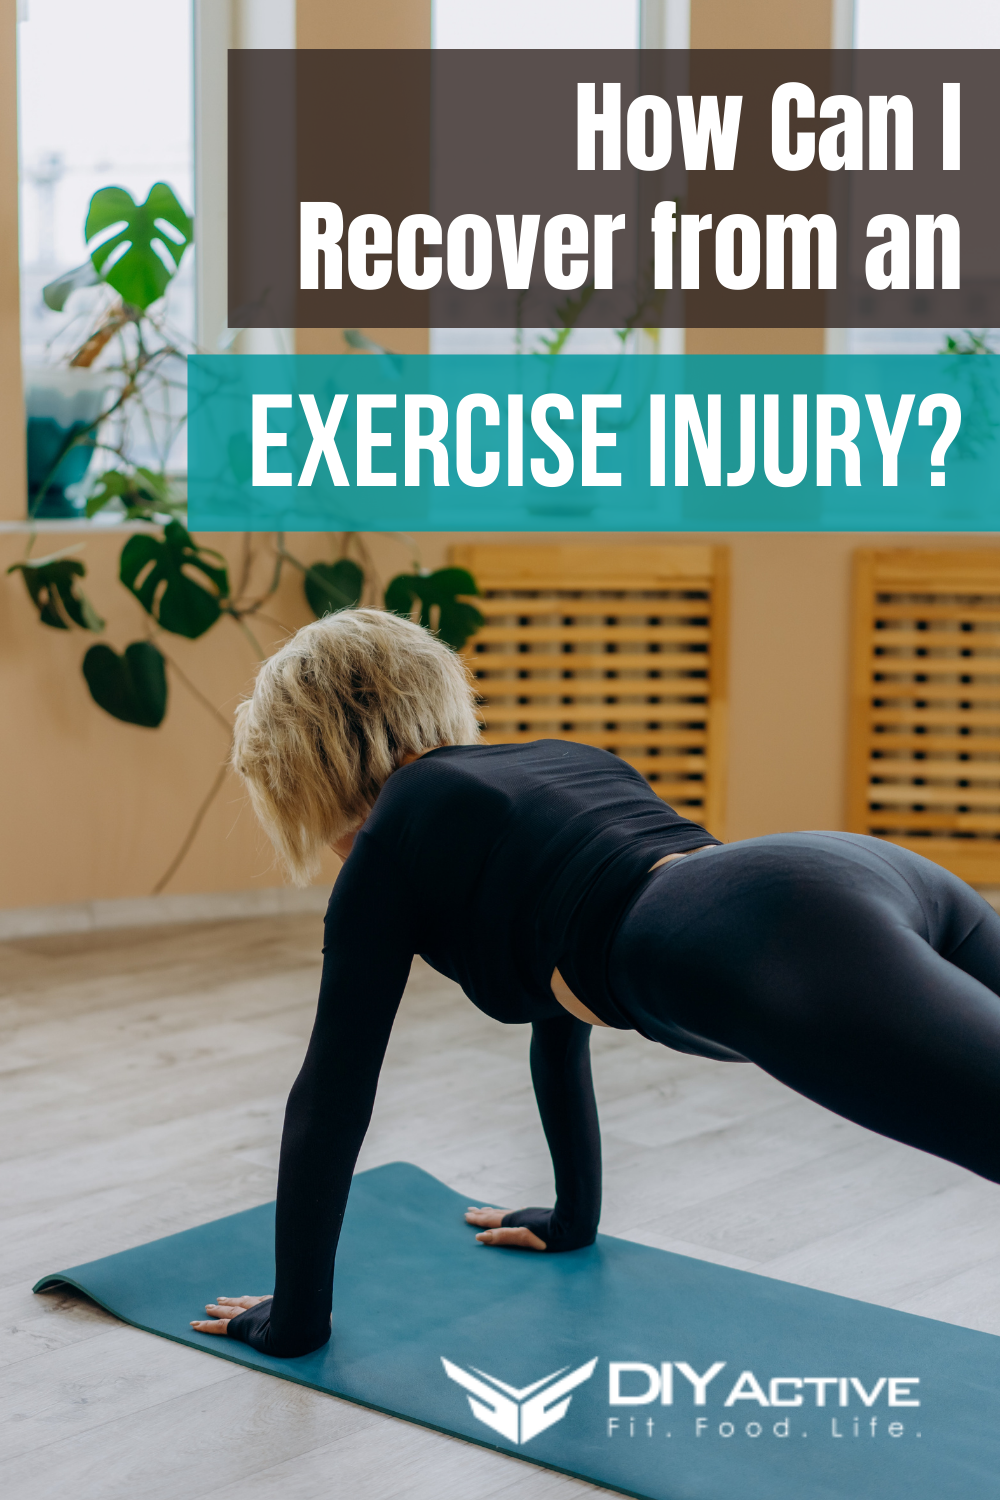 How Can I Recover from an Exercise Injury?